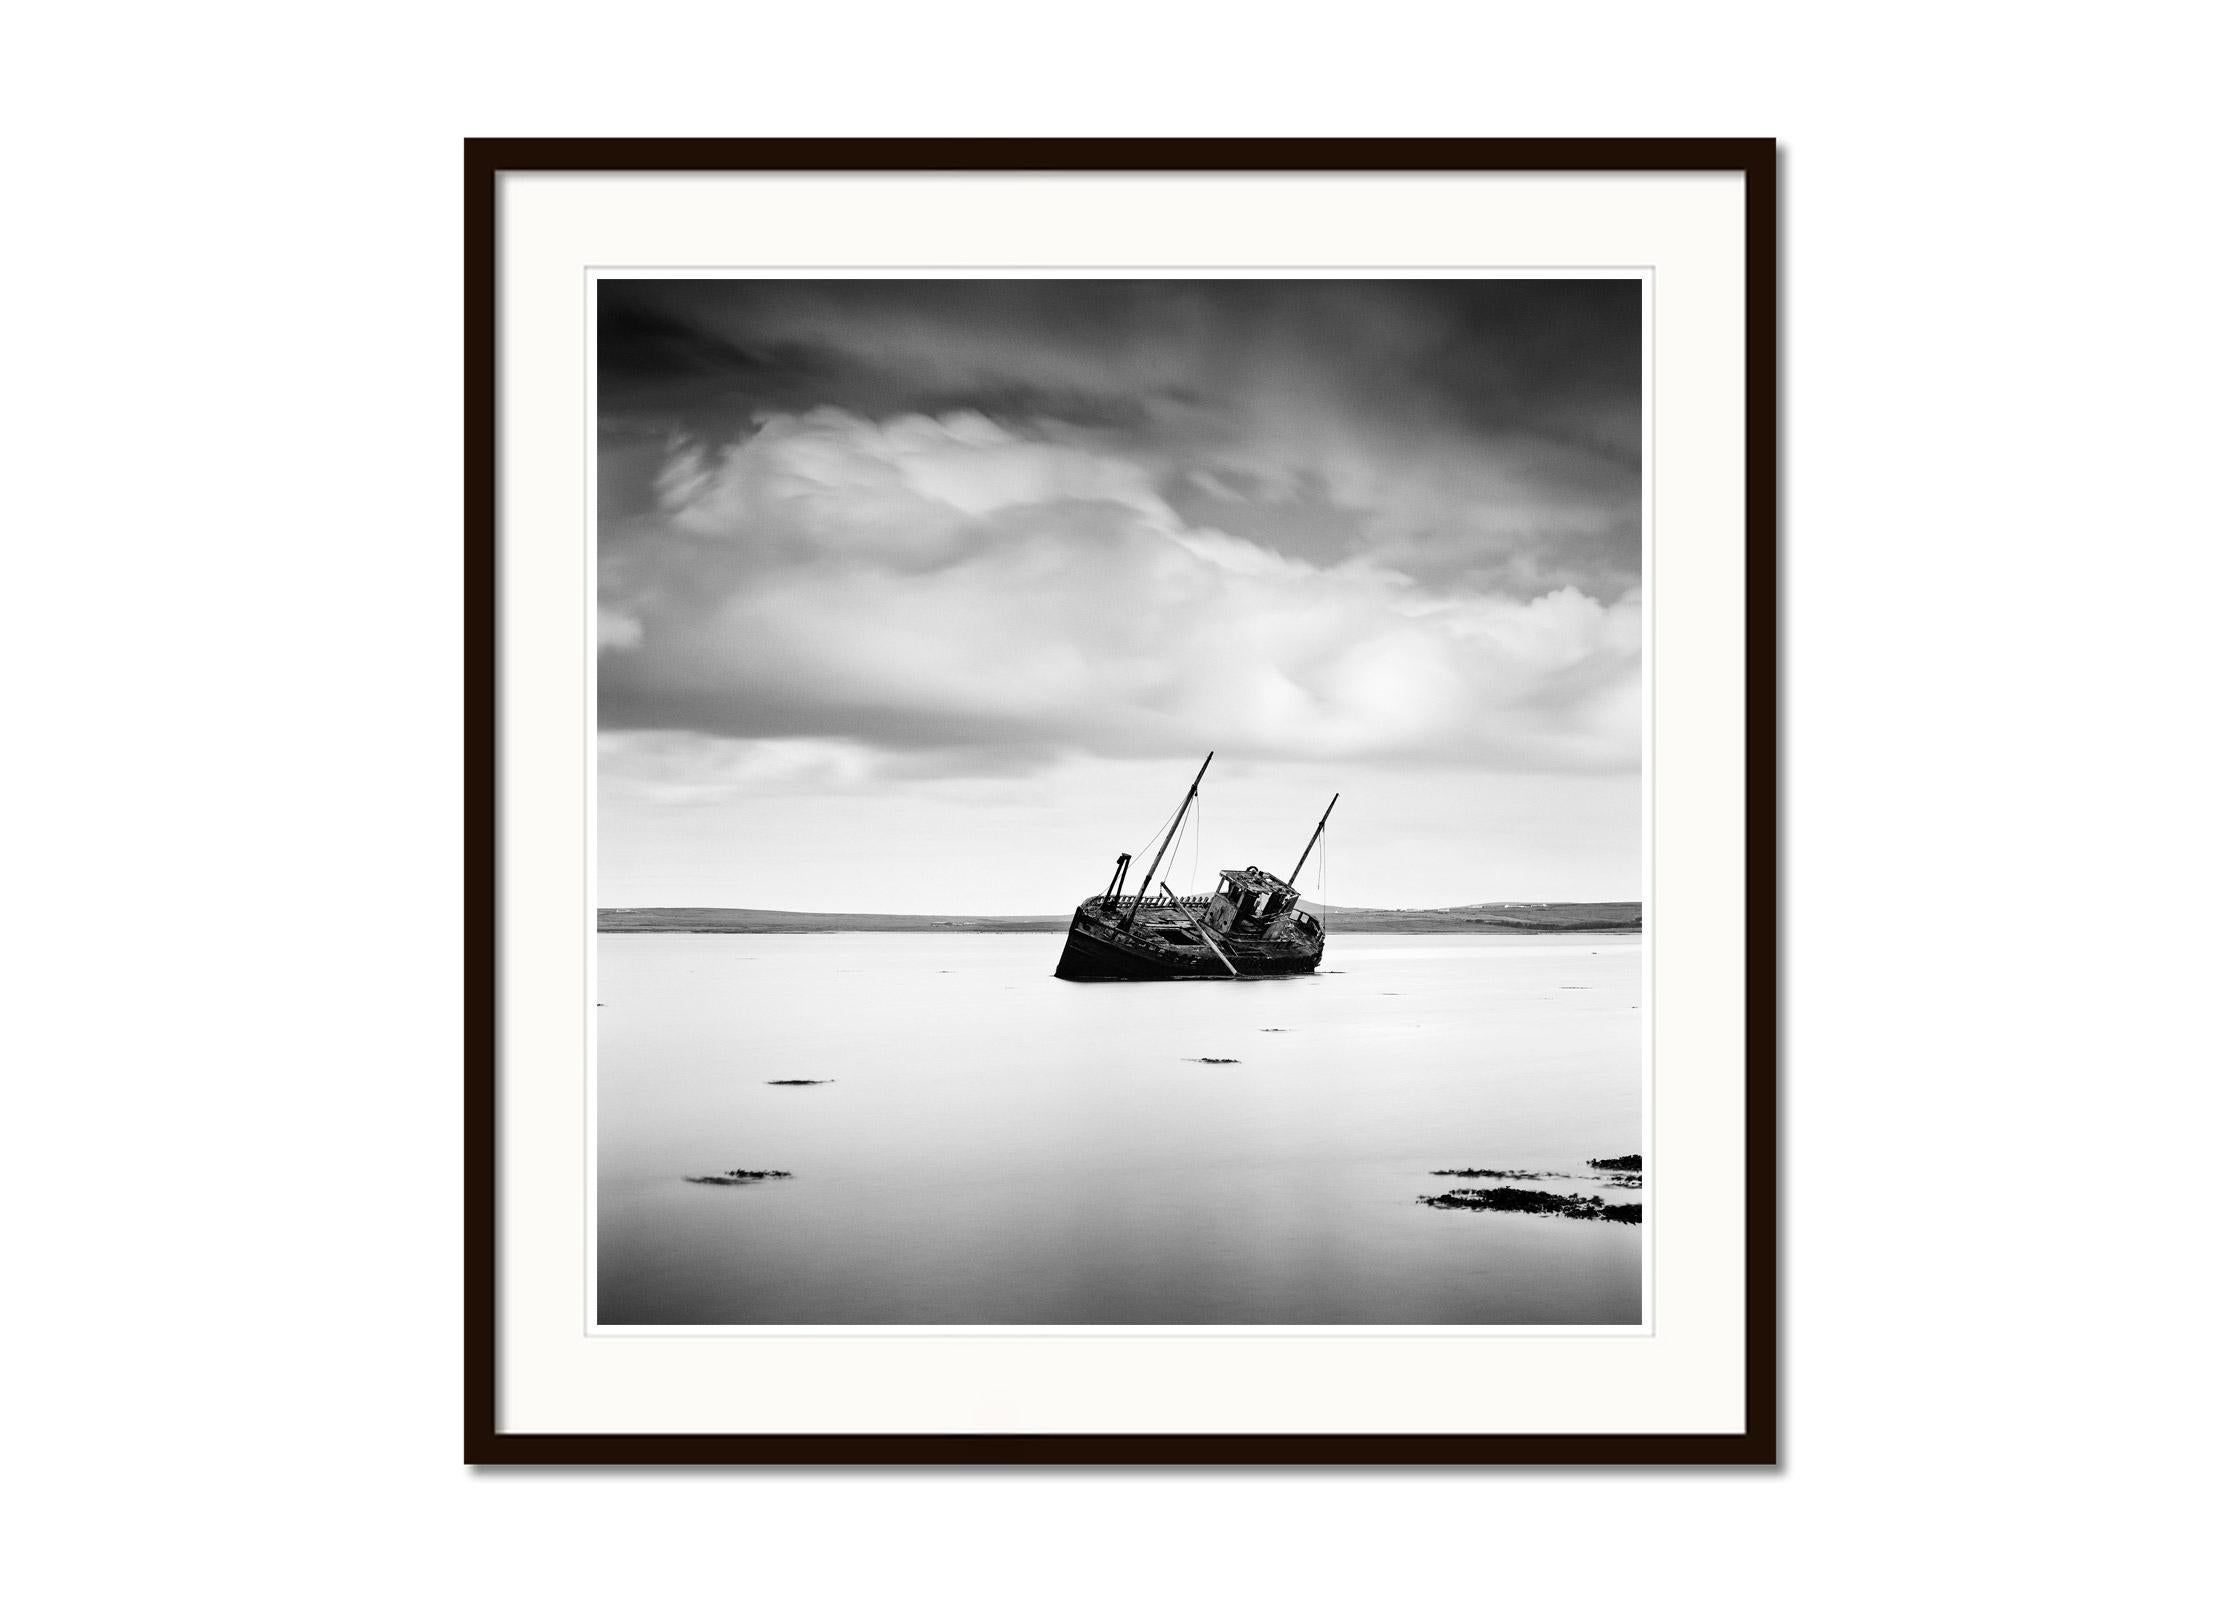 Stranded fishing Boat, beach, Ireland, black and white photography, landscape - Minimalist Photograph by Gerald Berghammer